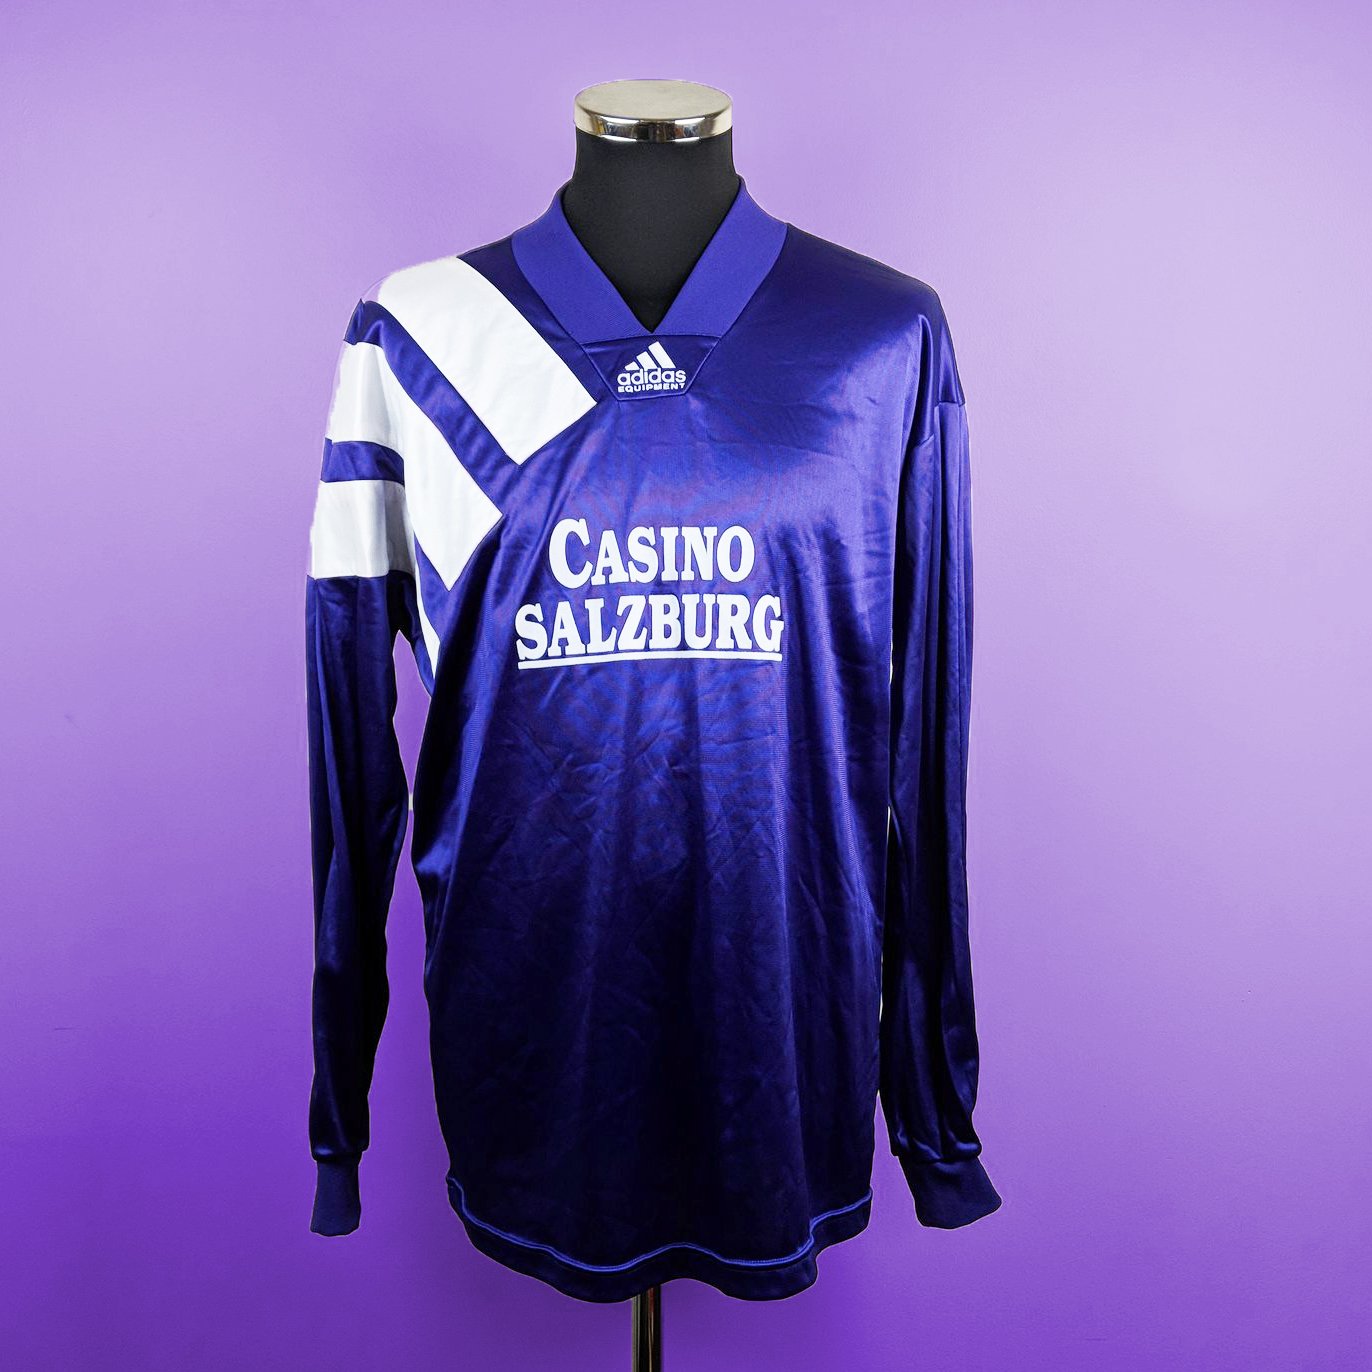 docena Chaleco ella es Classic Football Shirts on Twitter: "Casino Salzburg '94-95 away by Adidas  Can you think of any other teams that wore this design?  https://t.co/gDysCxOKep" / Twitter